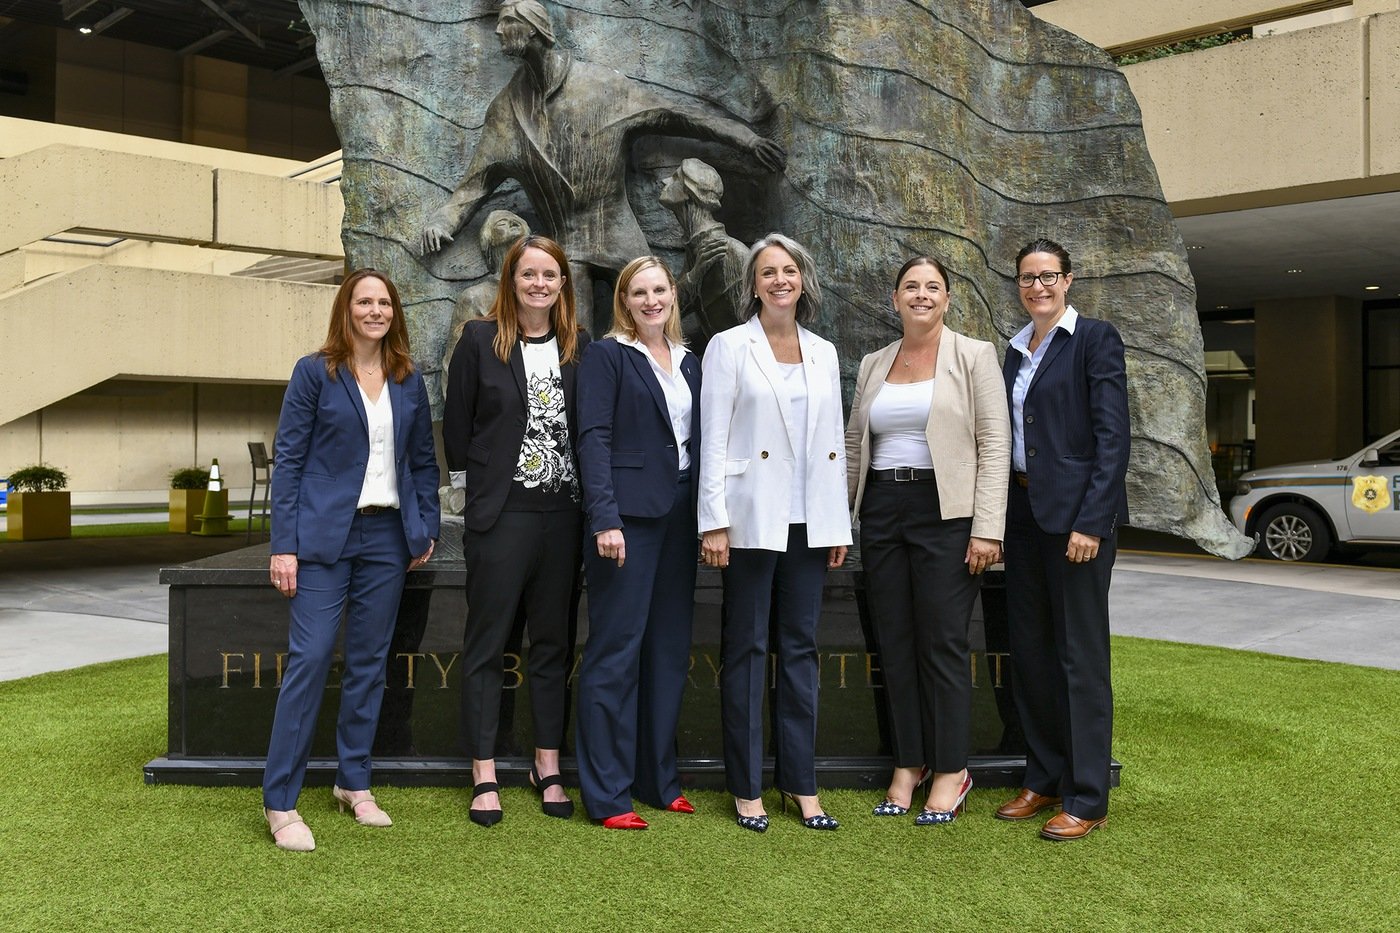 Six of the female agents who are currently leading FBI field offices. From left, Louisville Special Agent in Charge Jodi Cohen, Atlanta Special Agent in Charge Keri Farley, Jacksonville Special Agent in Charge Sherri E. Onks, Philadelphia Special Agent in Charge Jacqueline Maguire, Albany Special Agent in Charge Janeen DiGuiseppi, and Alyssa M. Doyle, special agent in charge of the Counterintelligence and Cyber Division at the Los Angeles Field Office.